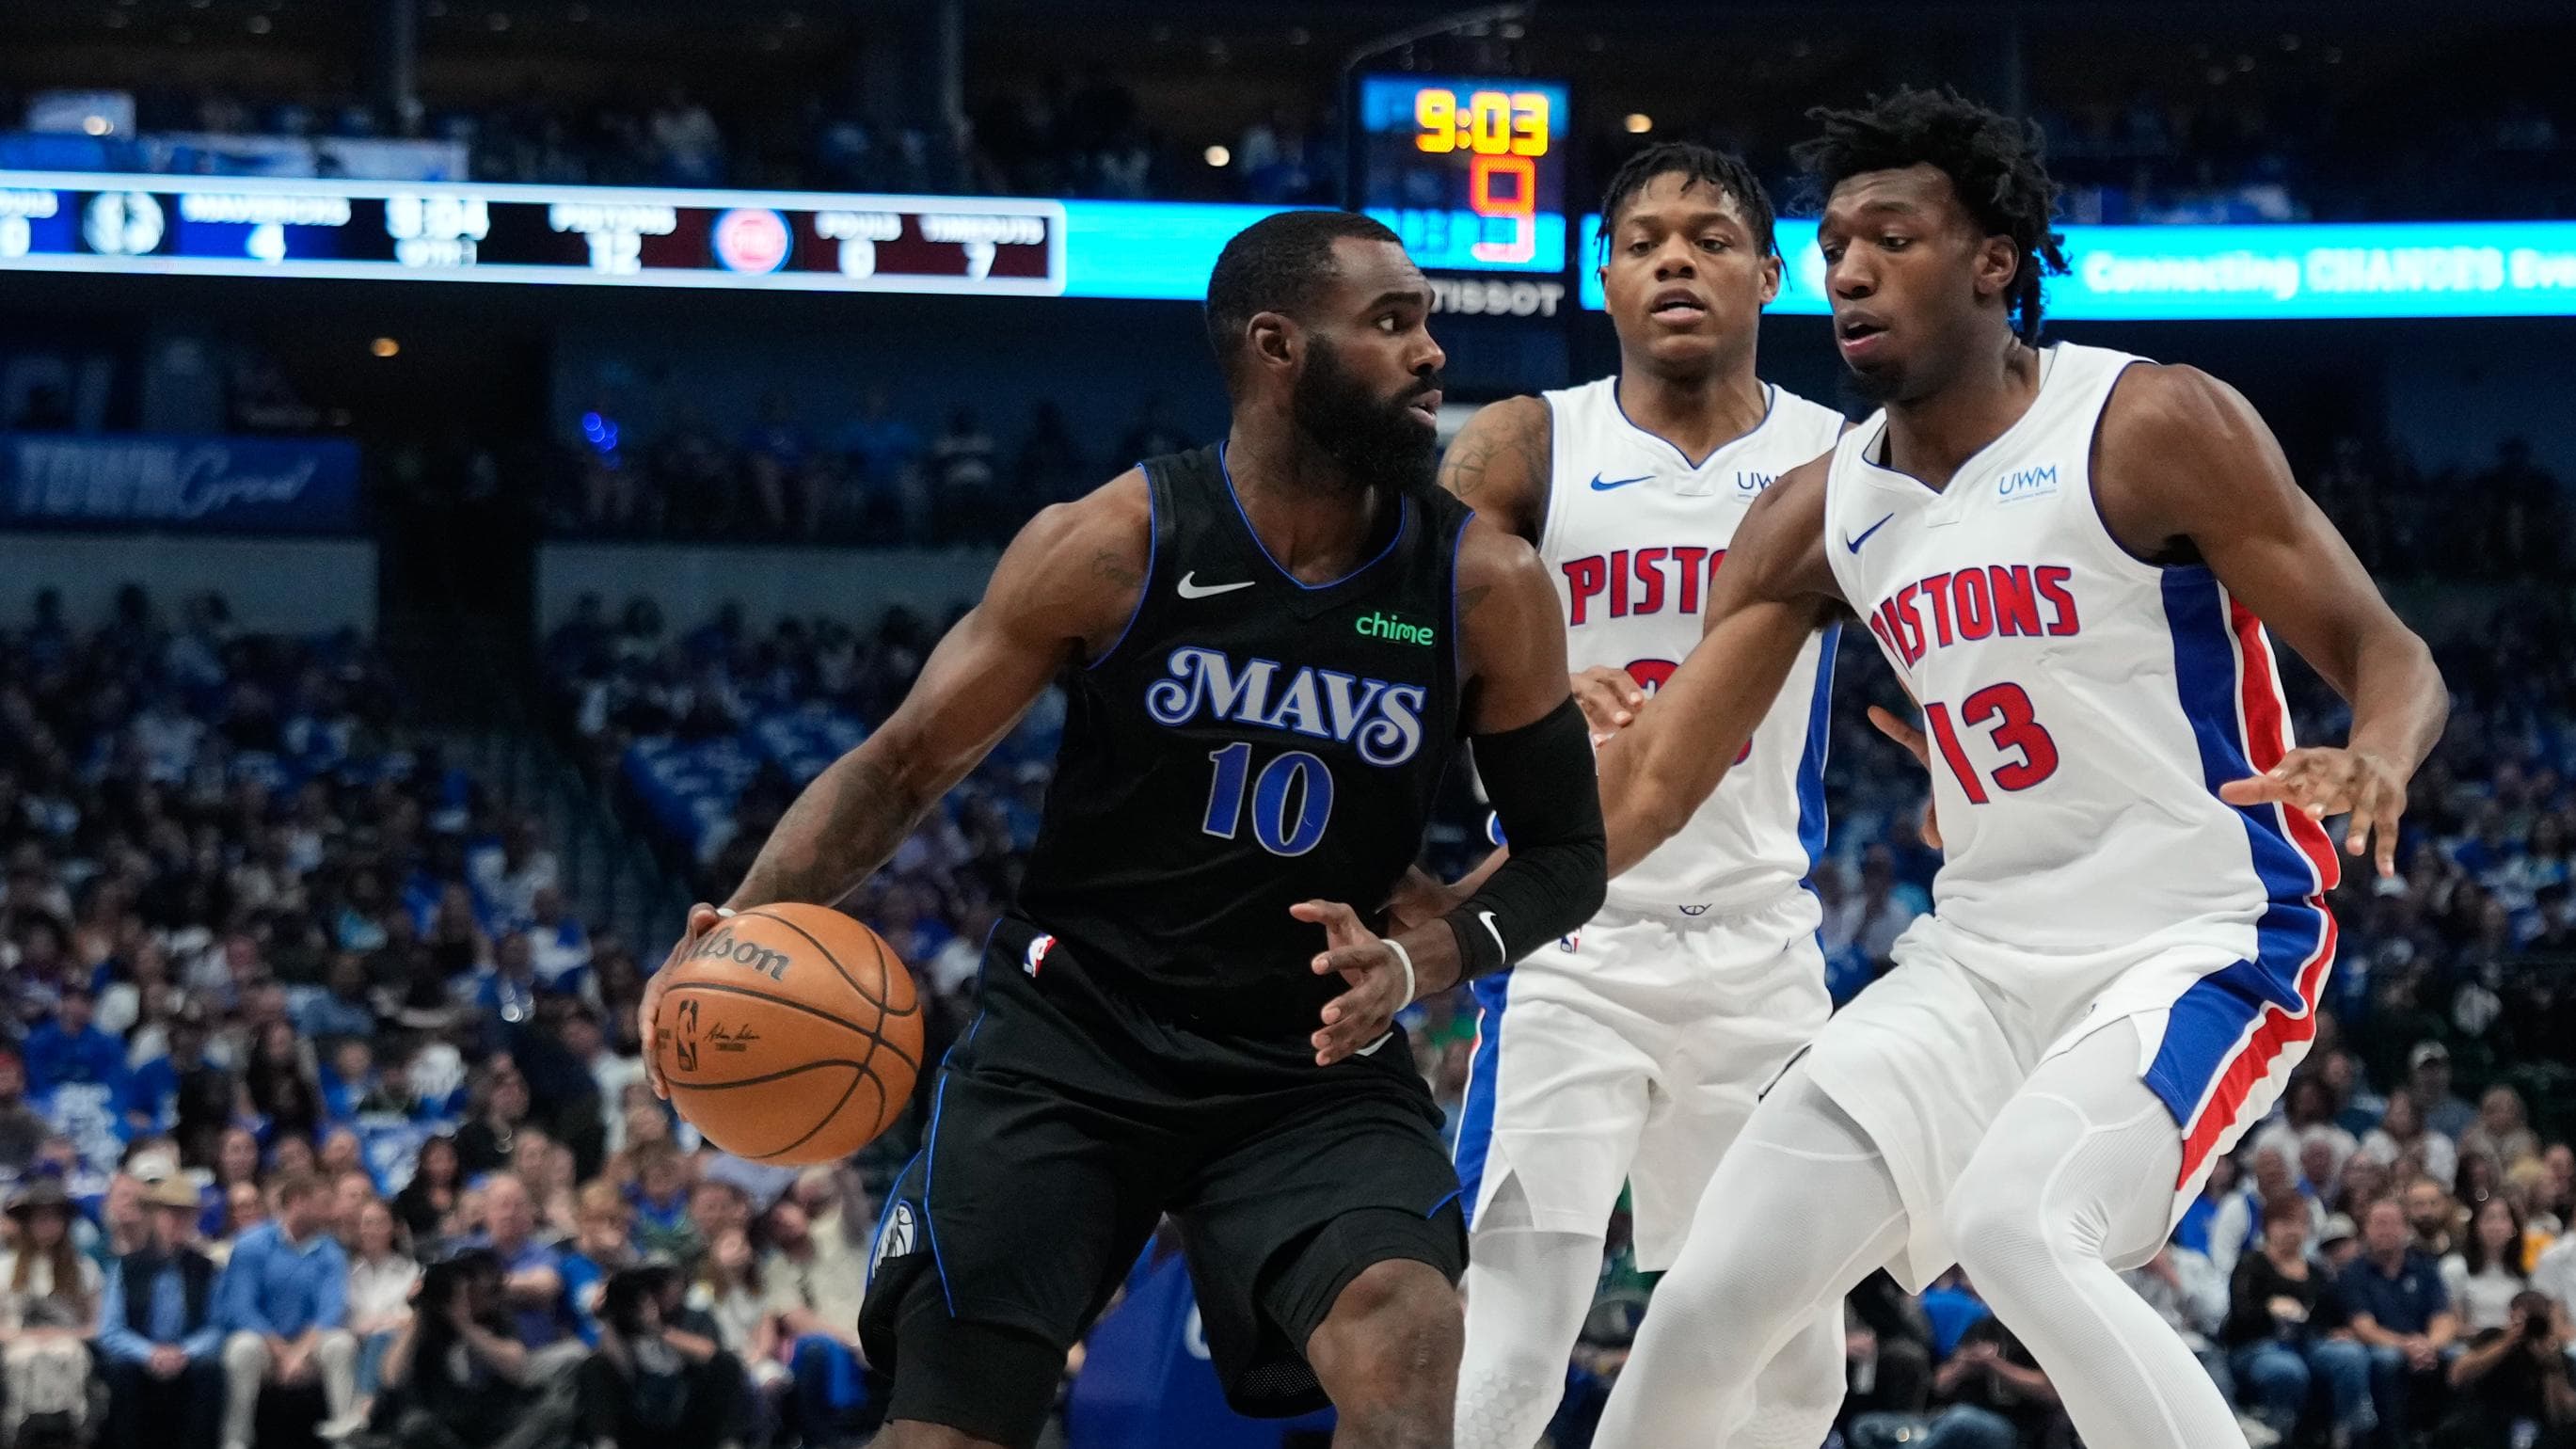 Offensive-Minded Wing Named as Top Trade Target for Detroit Pistons